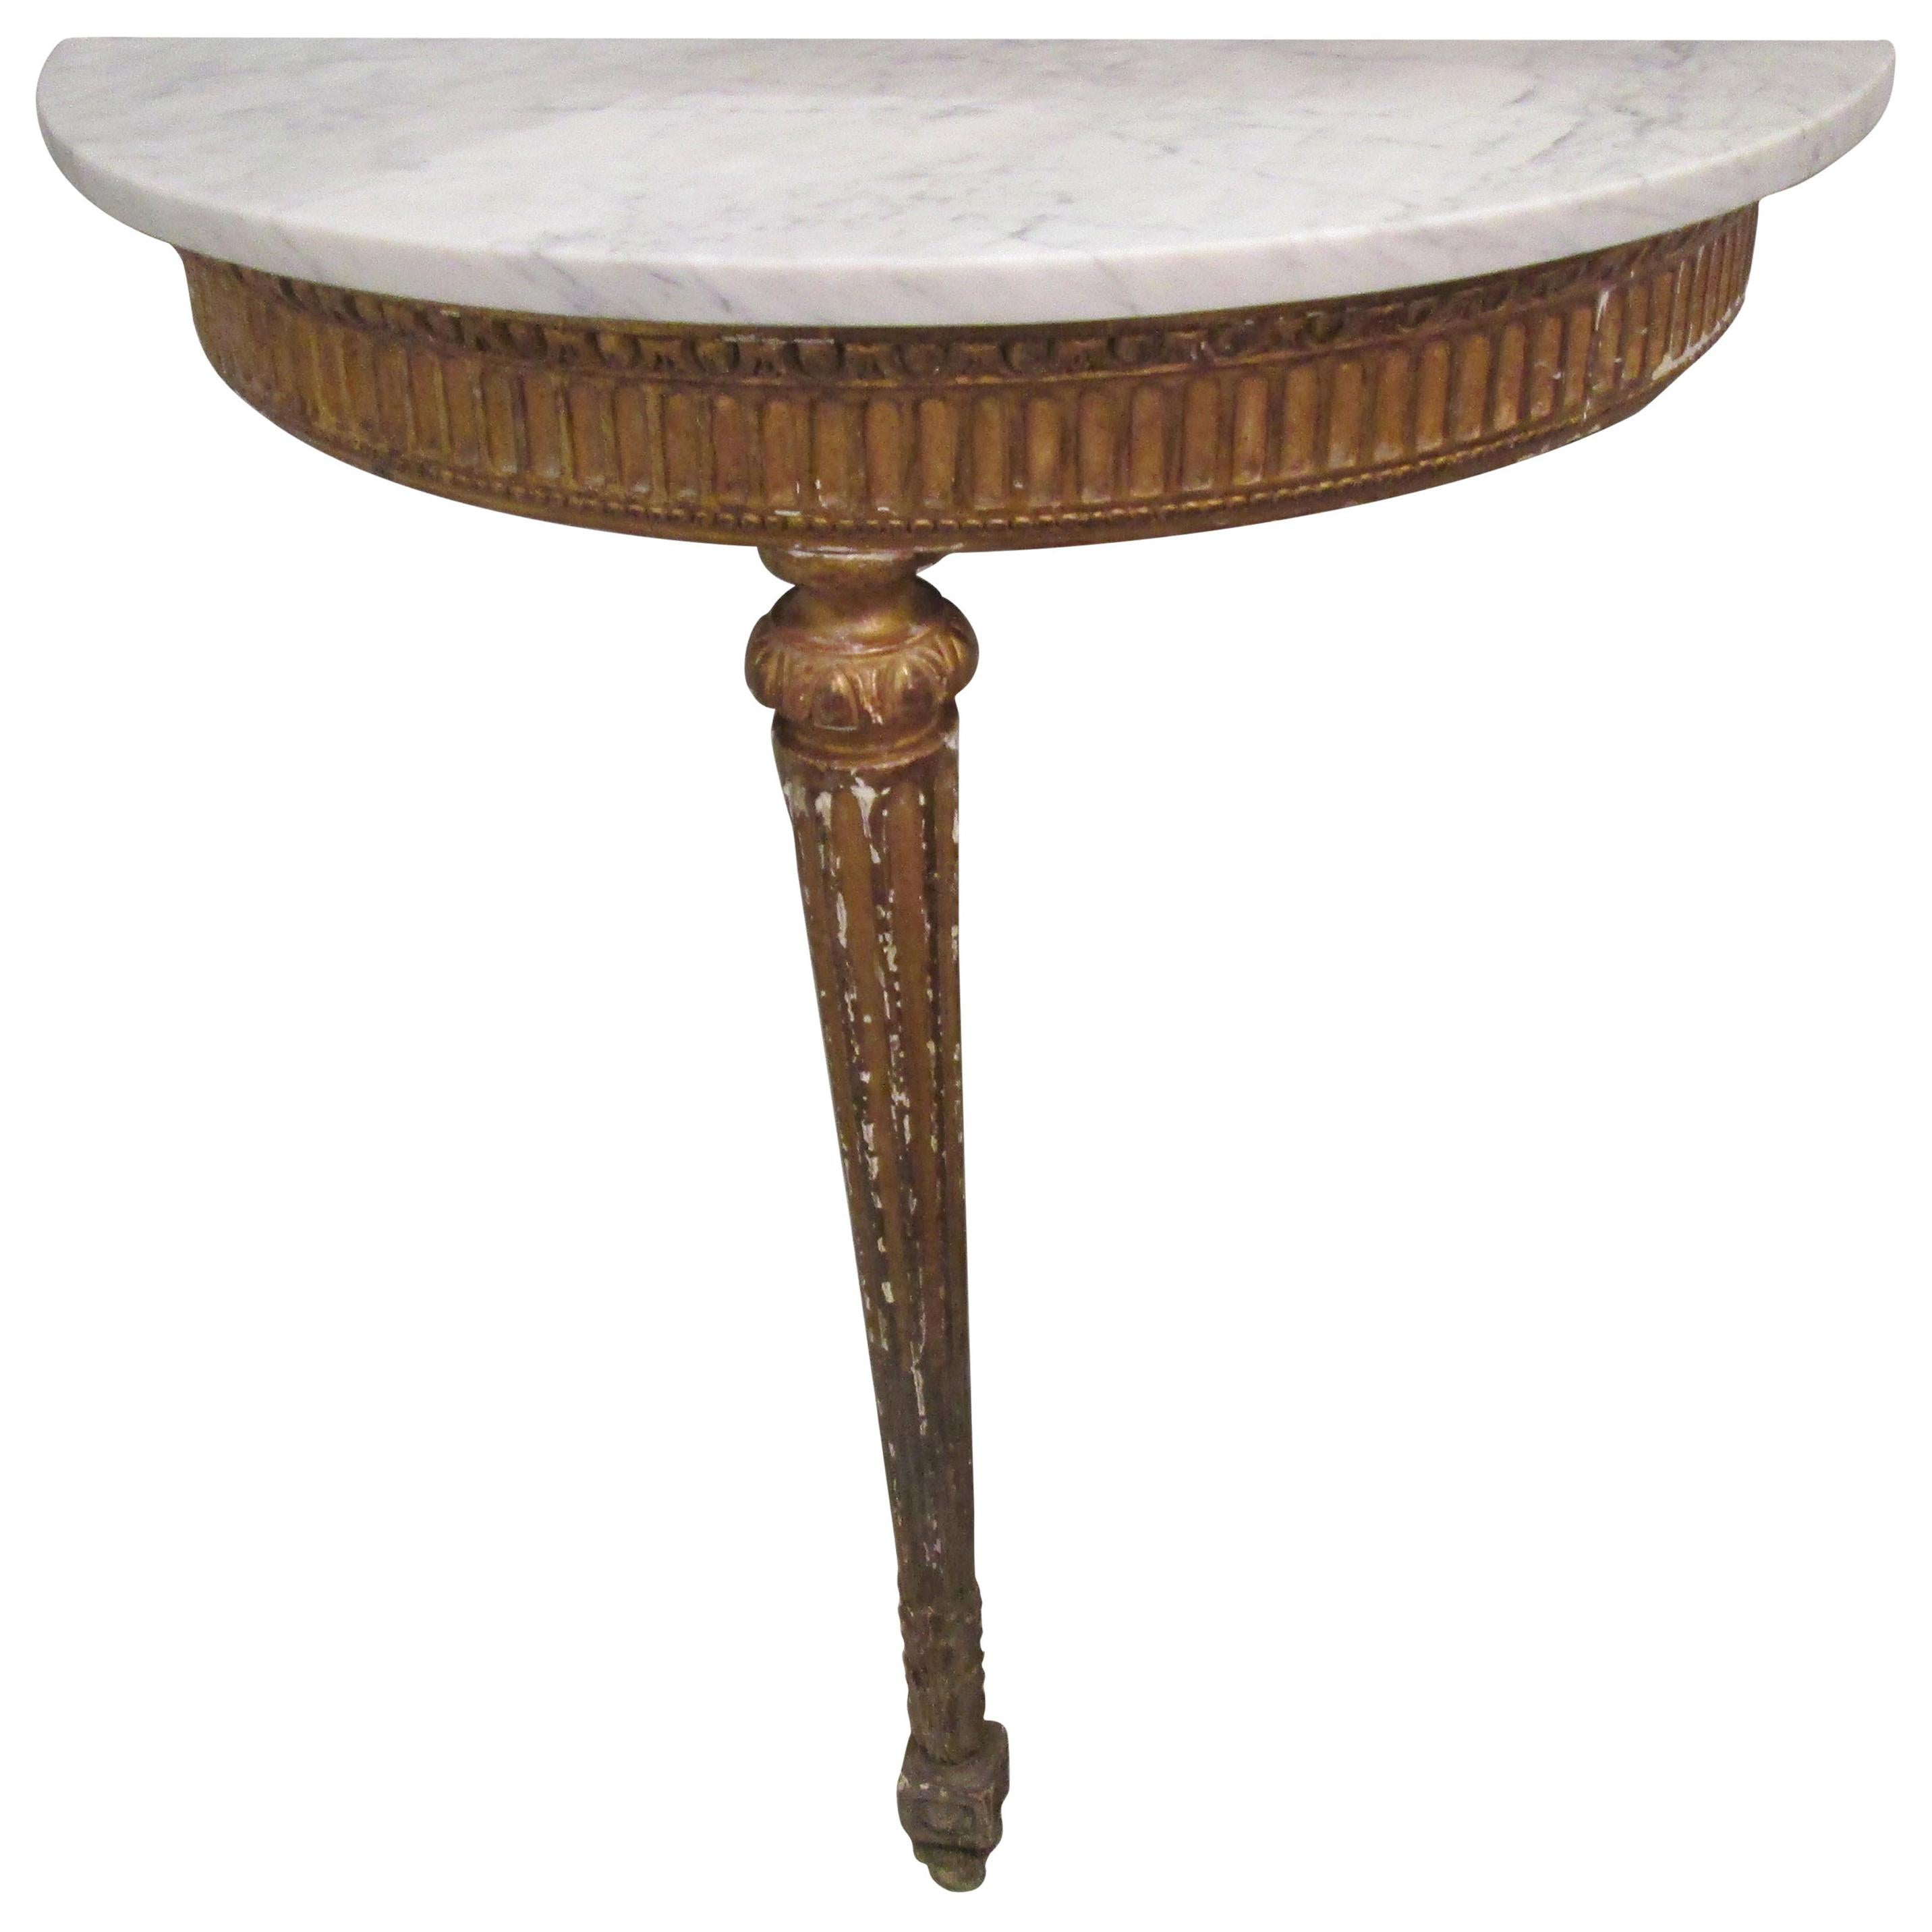 Antique French Giltwood Marble-Top Demilune Console